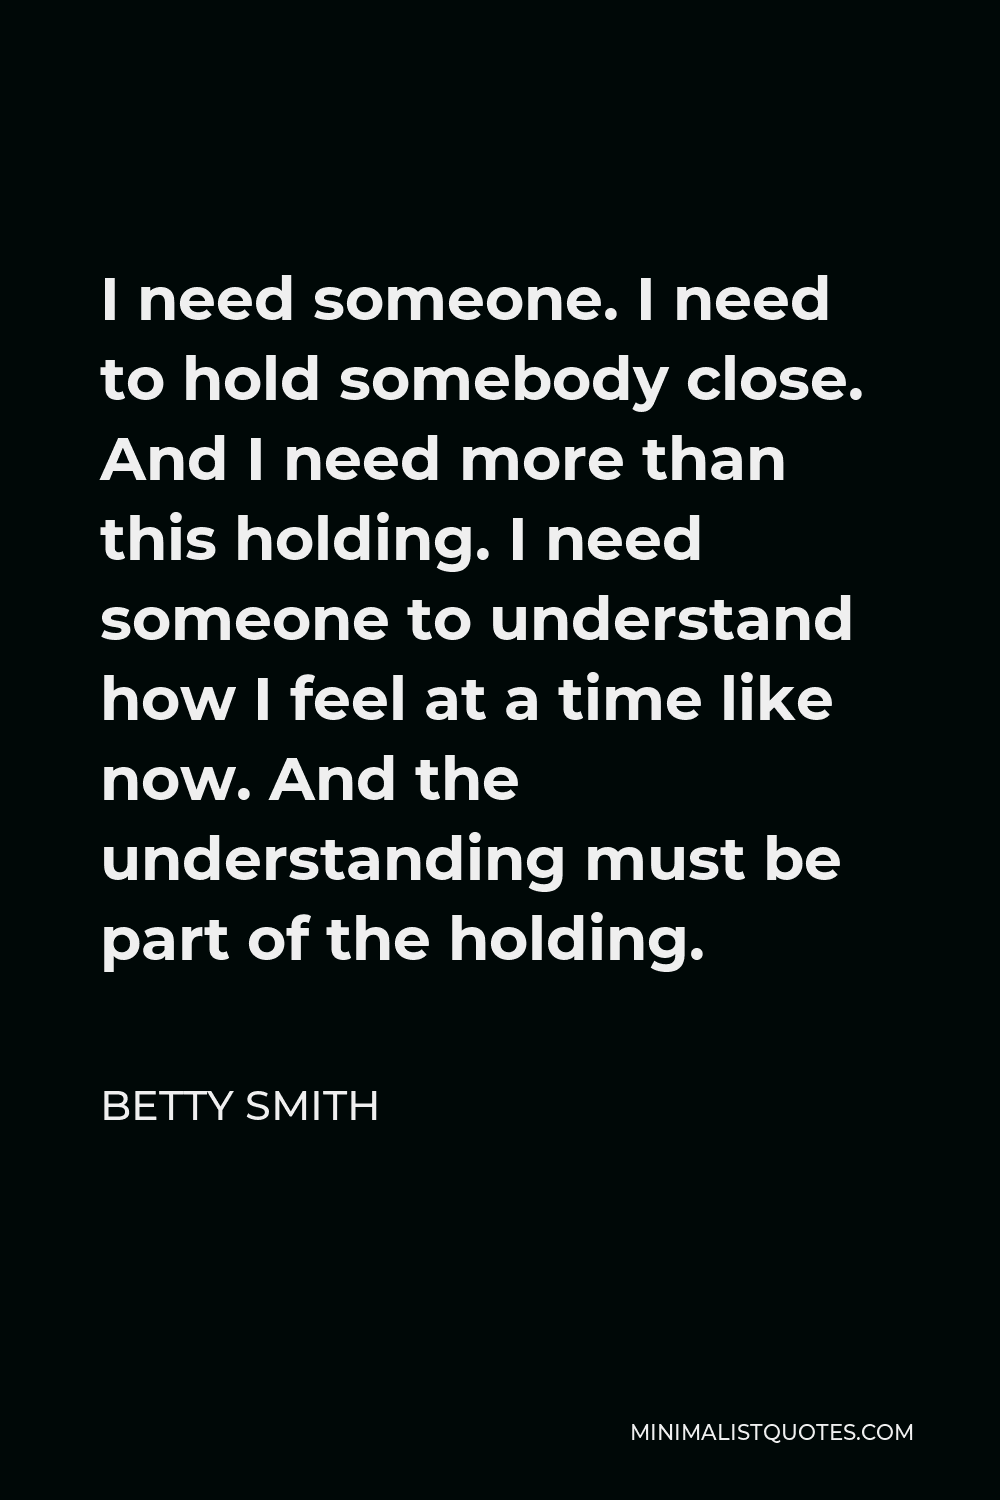 Betty Smith Quote - I need someone. I need to hold somebody close. And I need more than this holding. I need someone to understand how I feel at a time like now. And the understanding must be part of the holding.